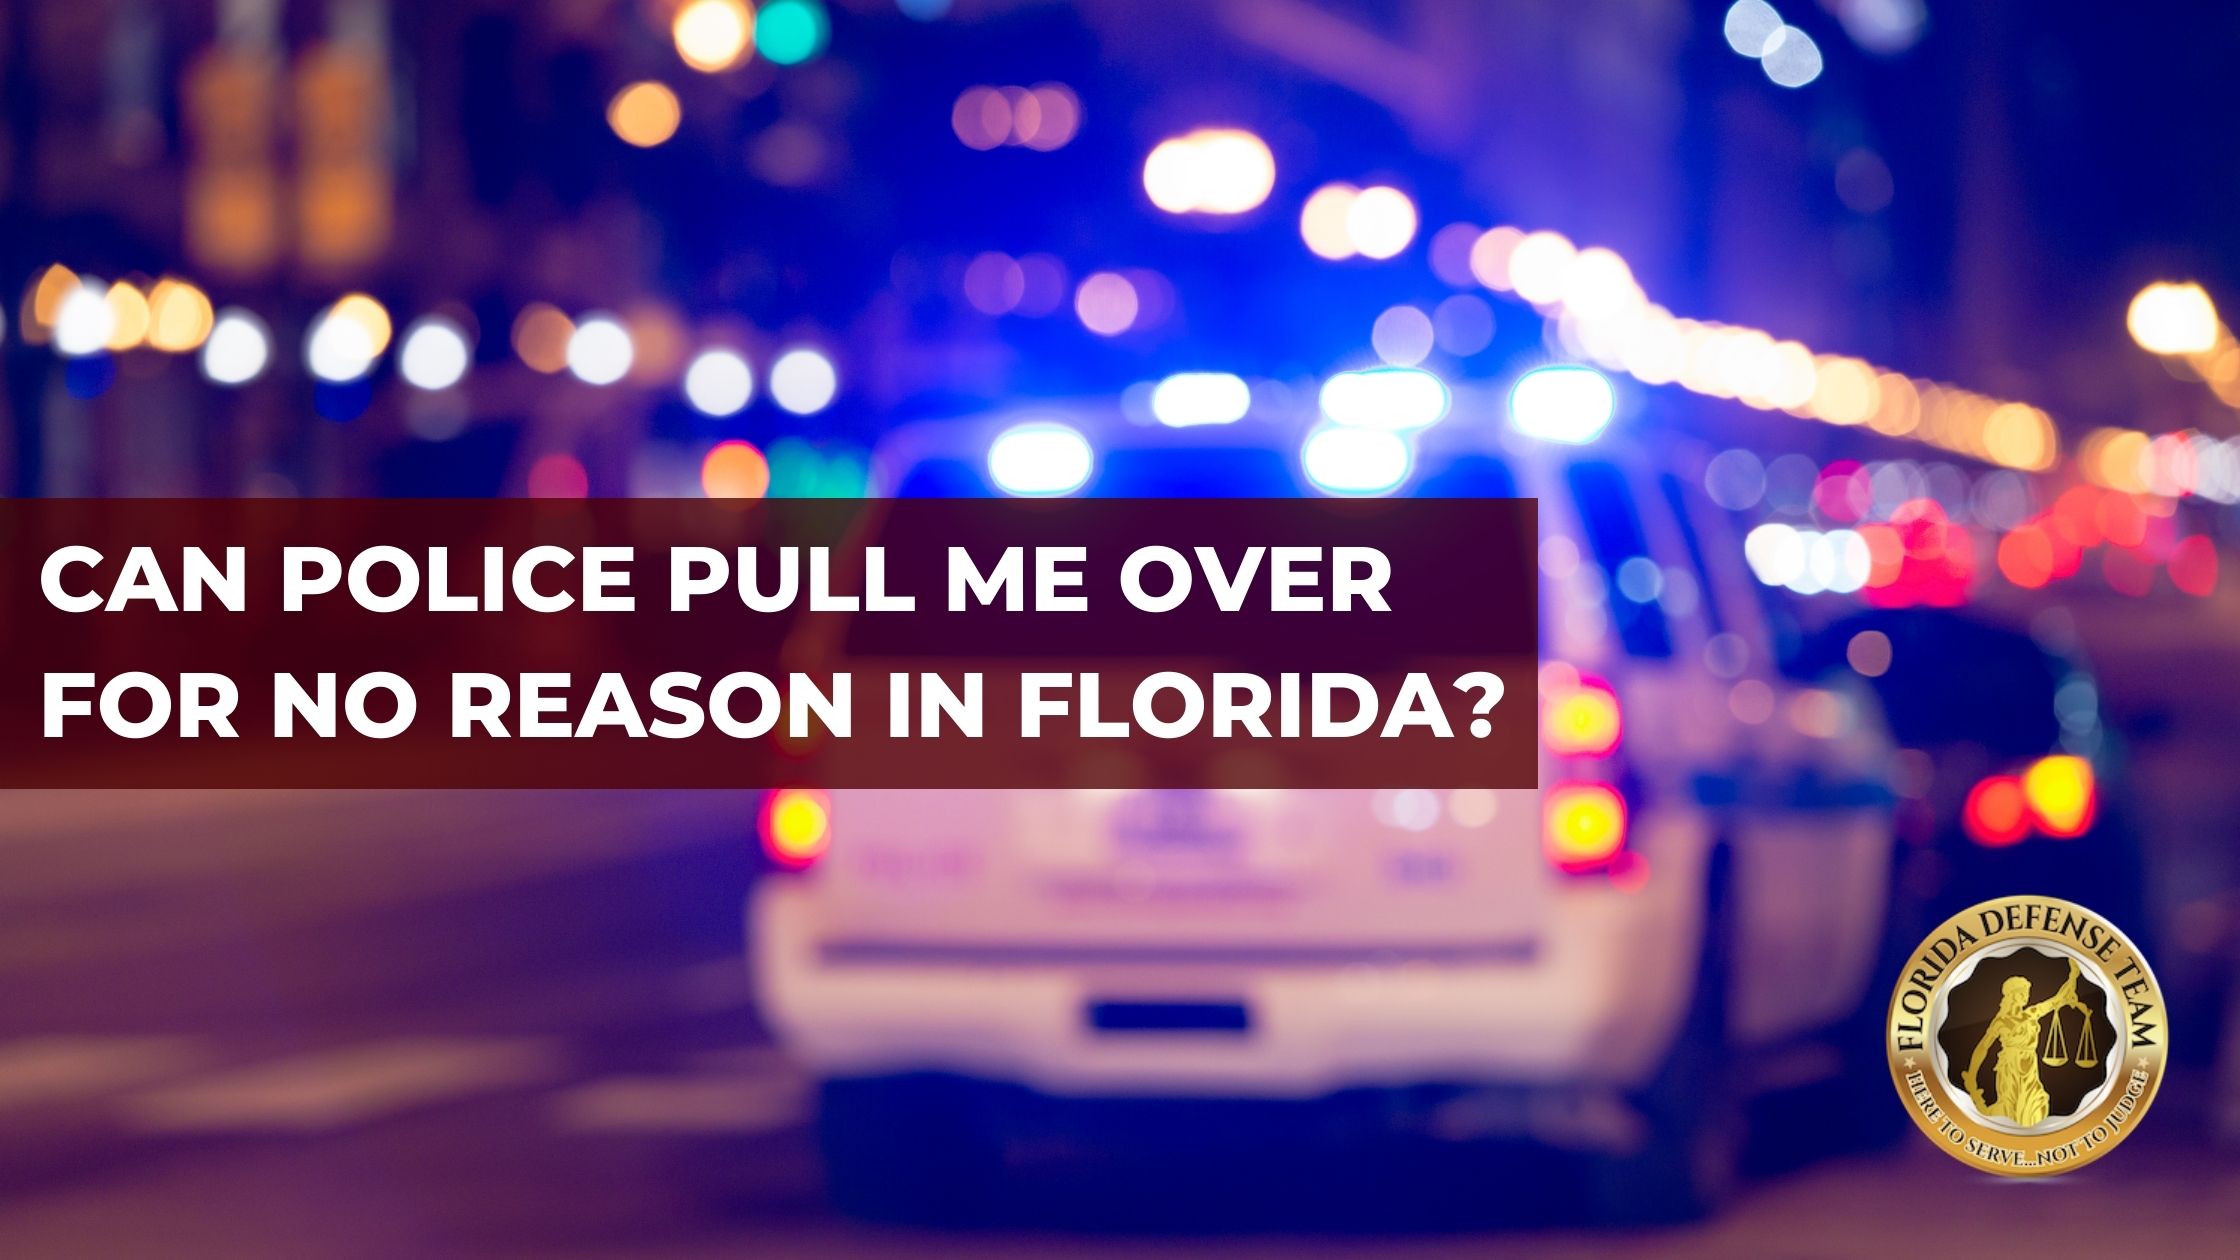 https://floridadefenseteam.com/wp-content/uploads/2021/09/Can-Police-Pull-Me-Over-For-No-Reason-In-Florida.jpg